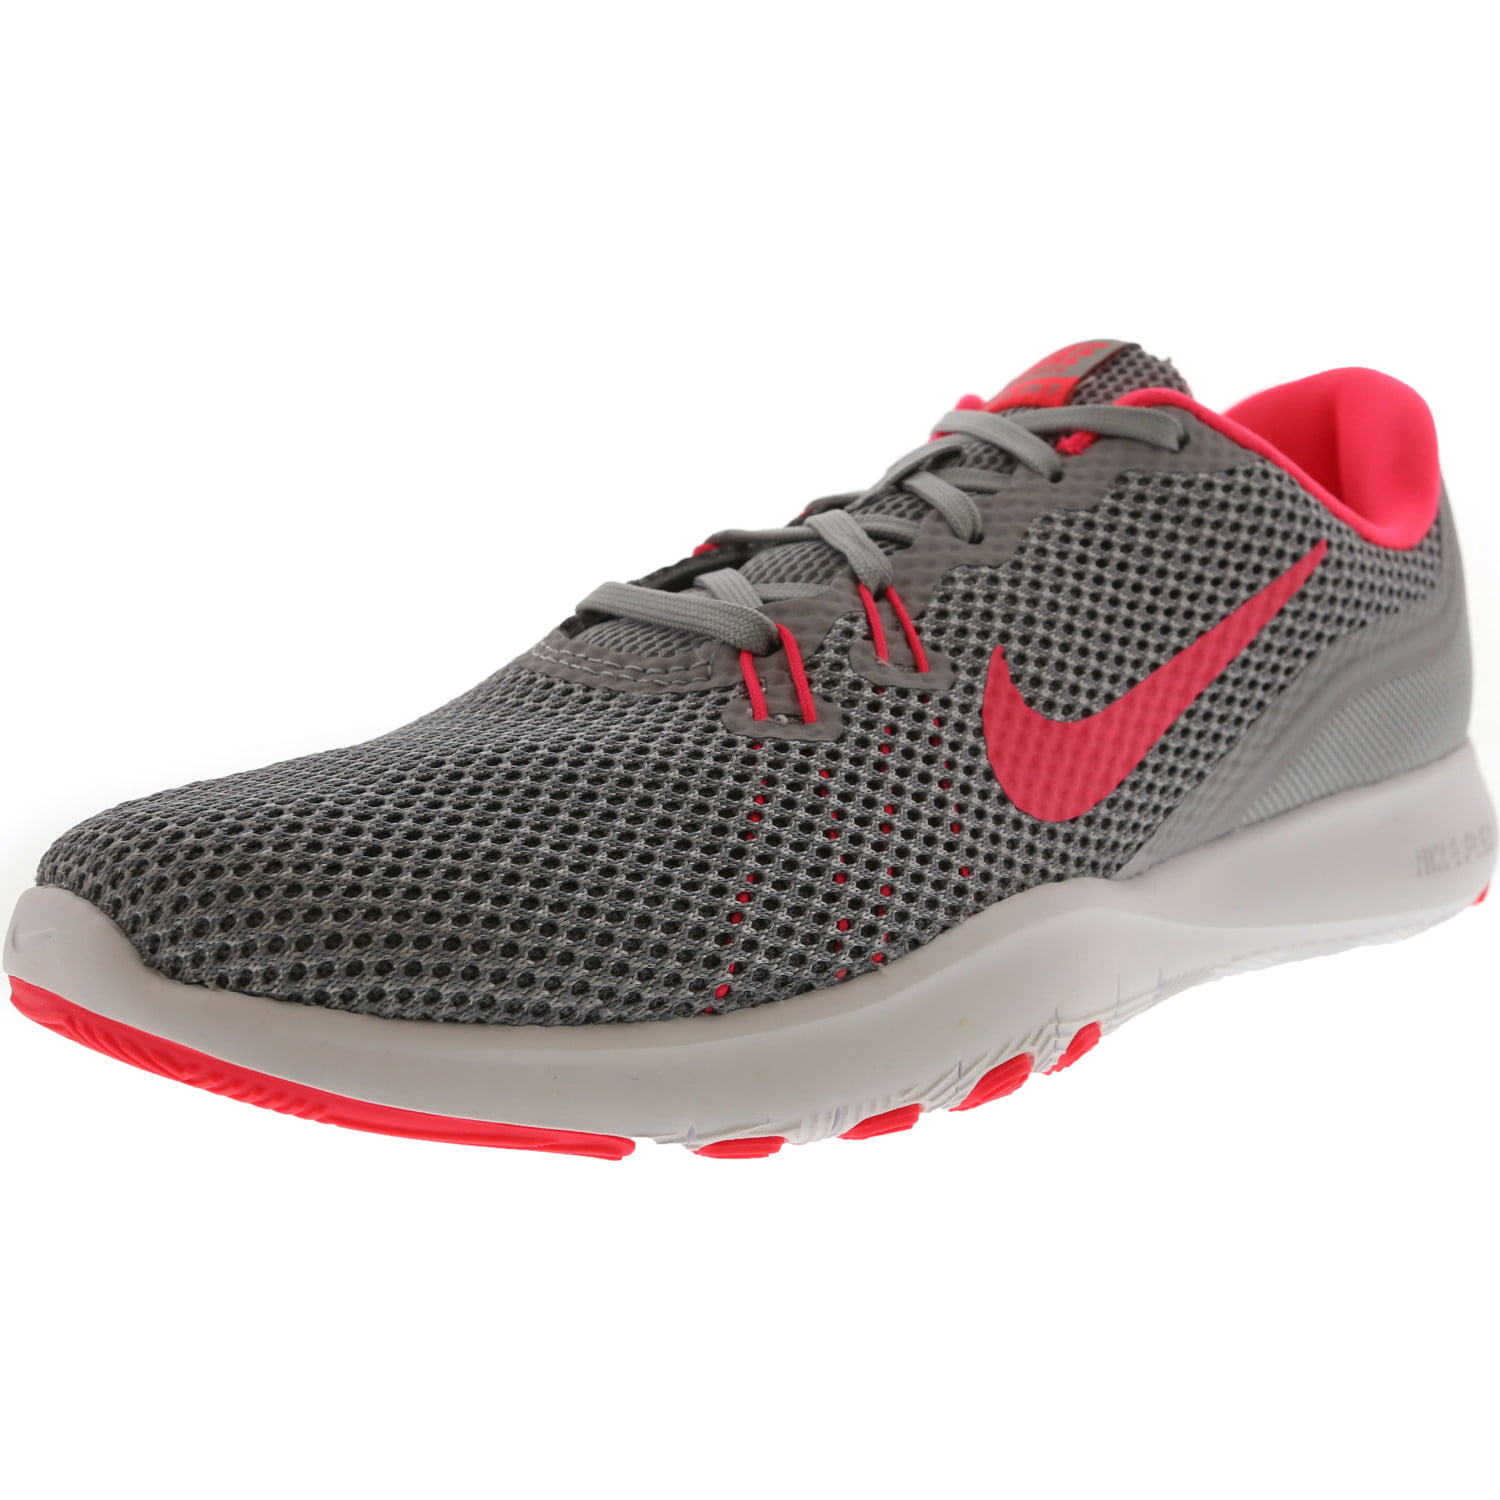 nike womens grey and pink trainers